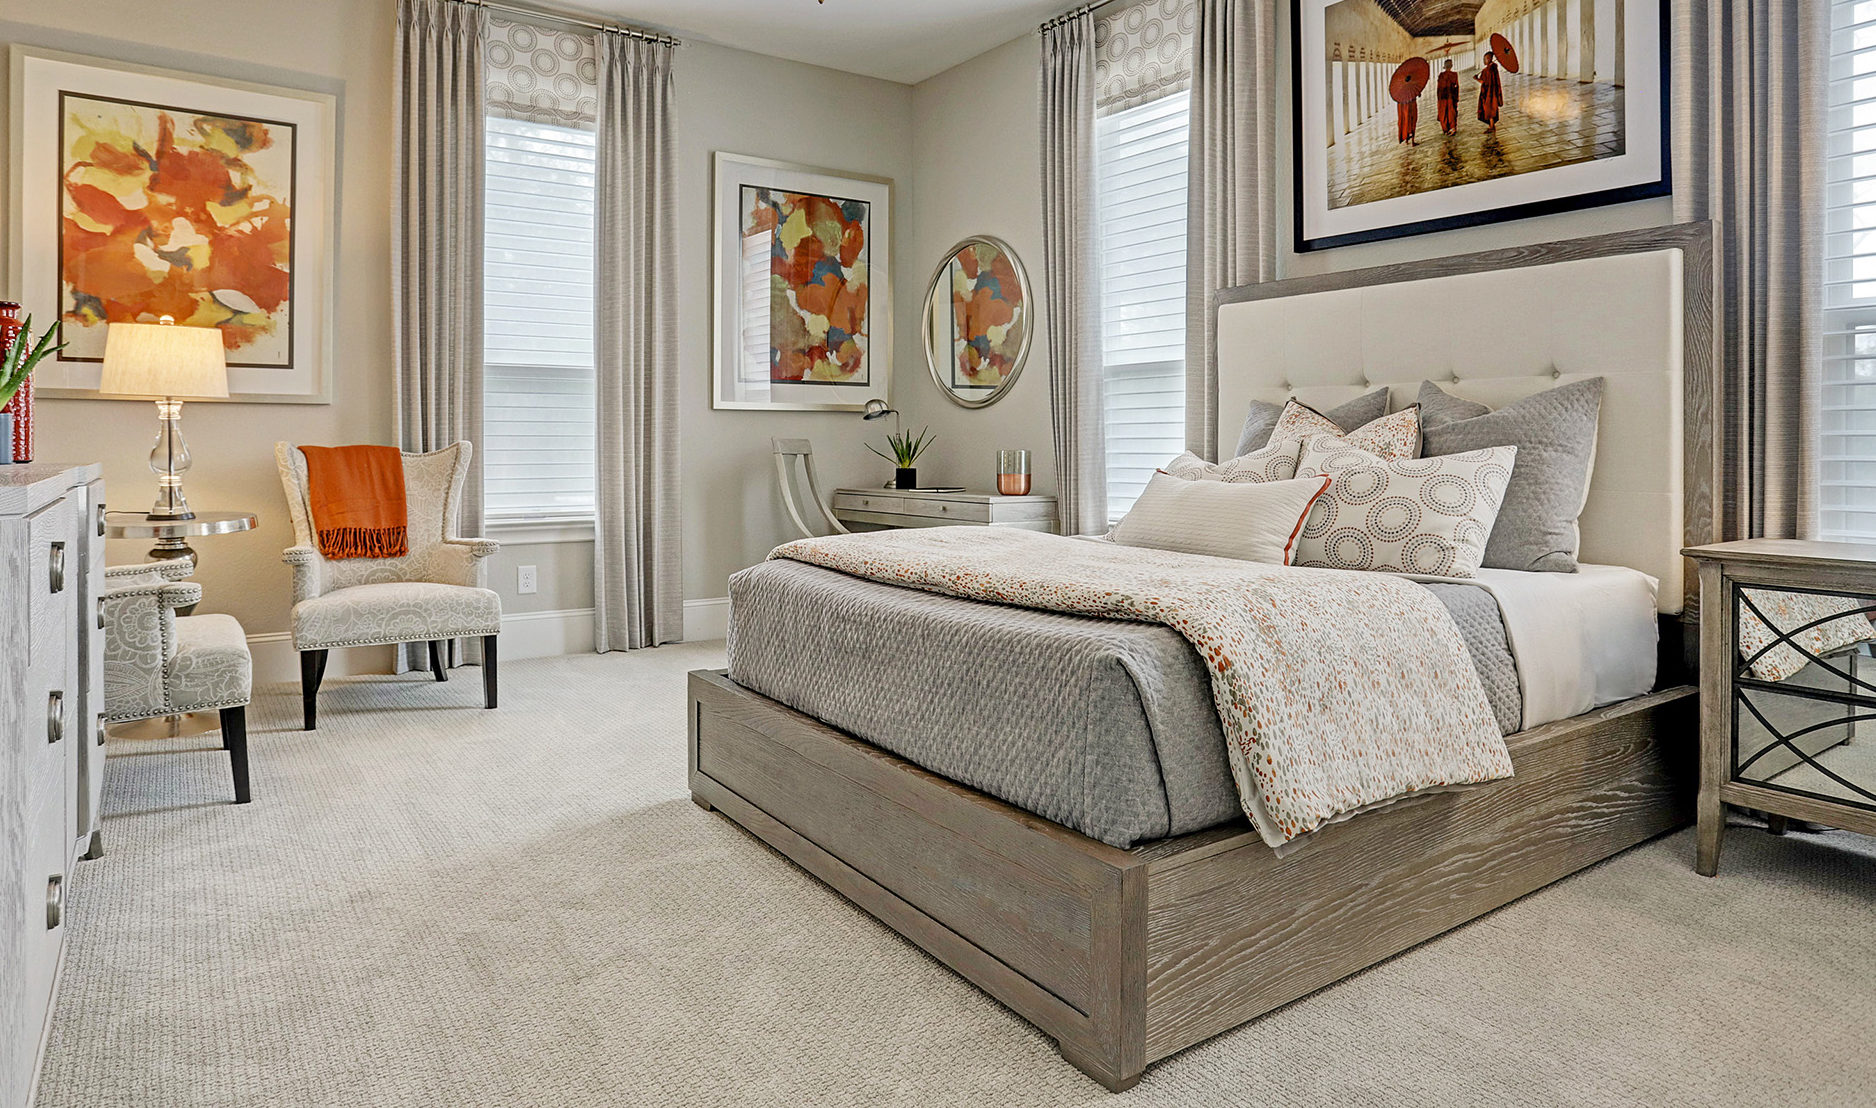 Try one of these master bedroom paint colors this year